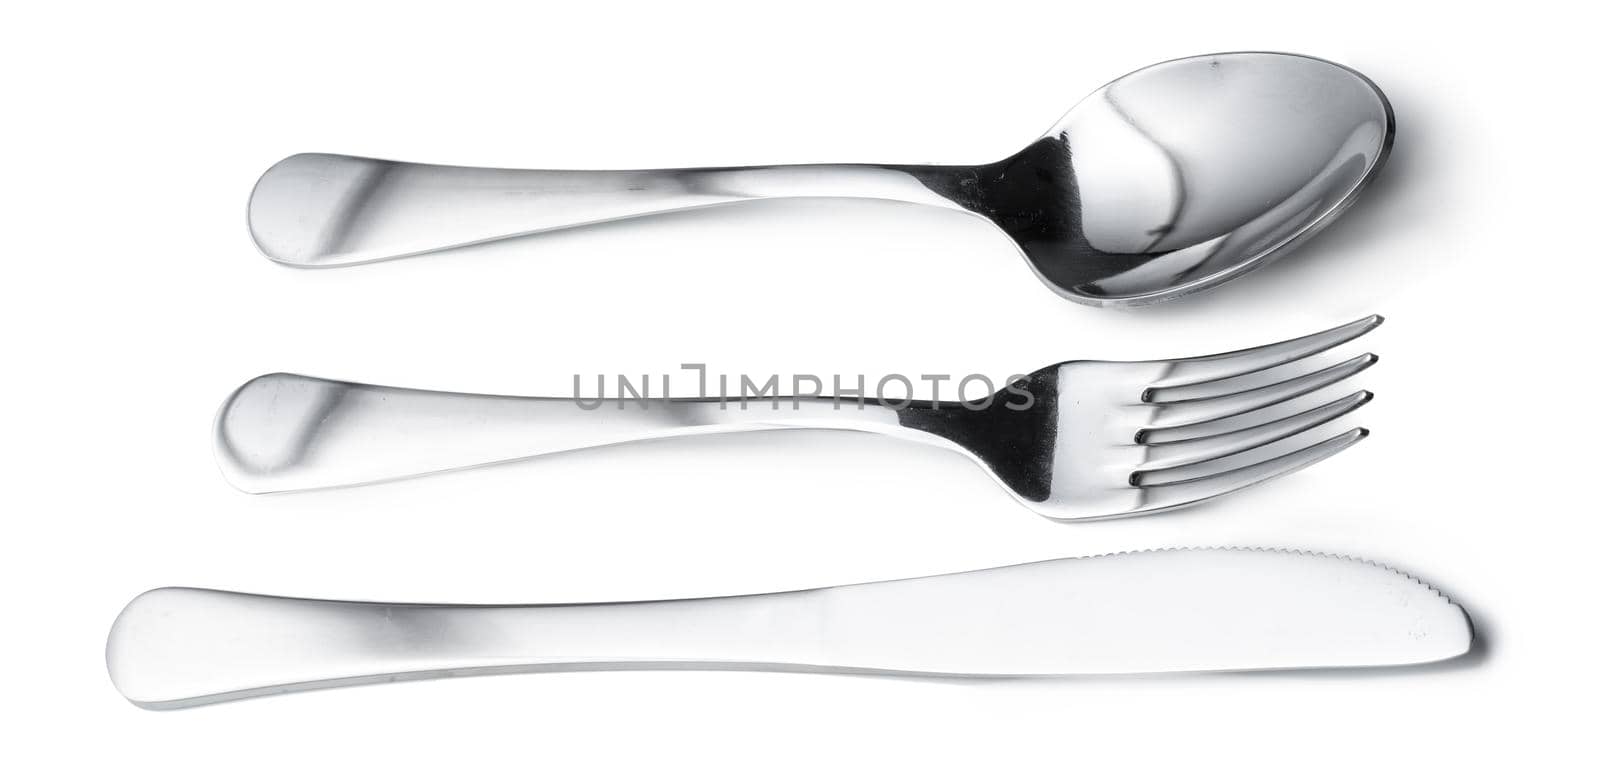 Spoon, knife and fork isolated on white background by Fabrikasimf